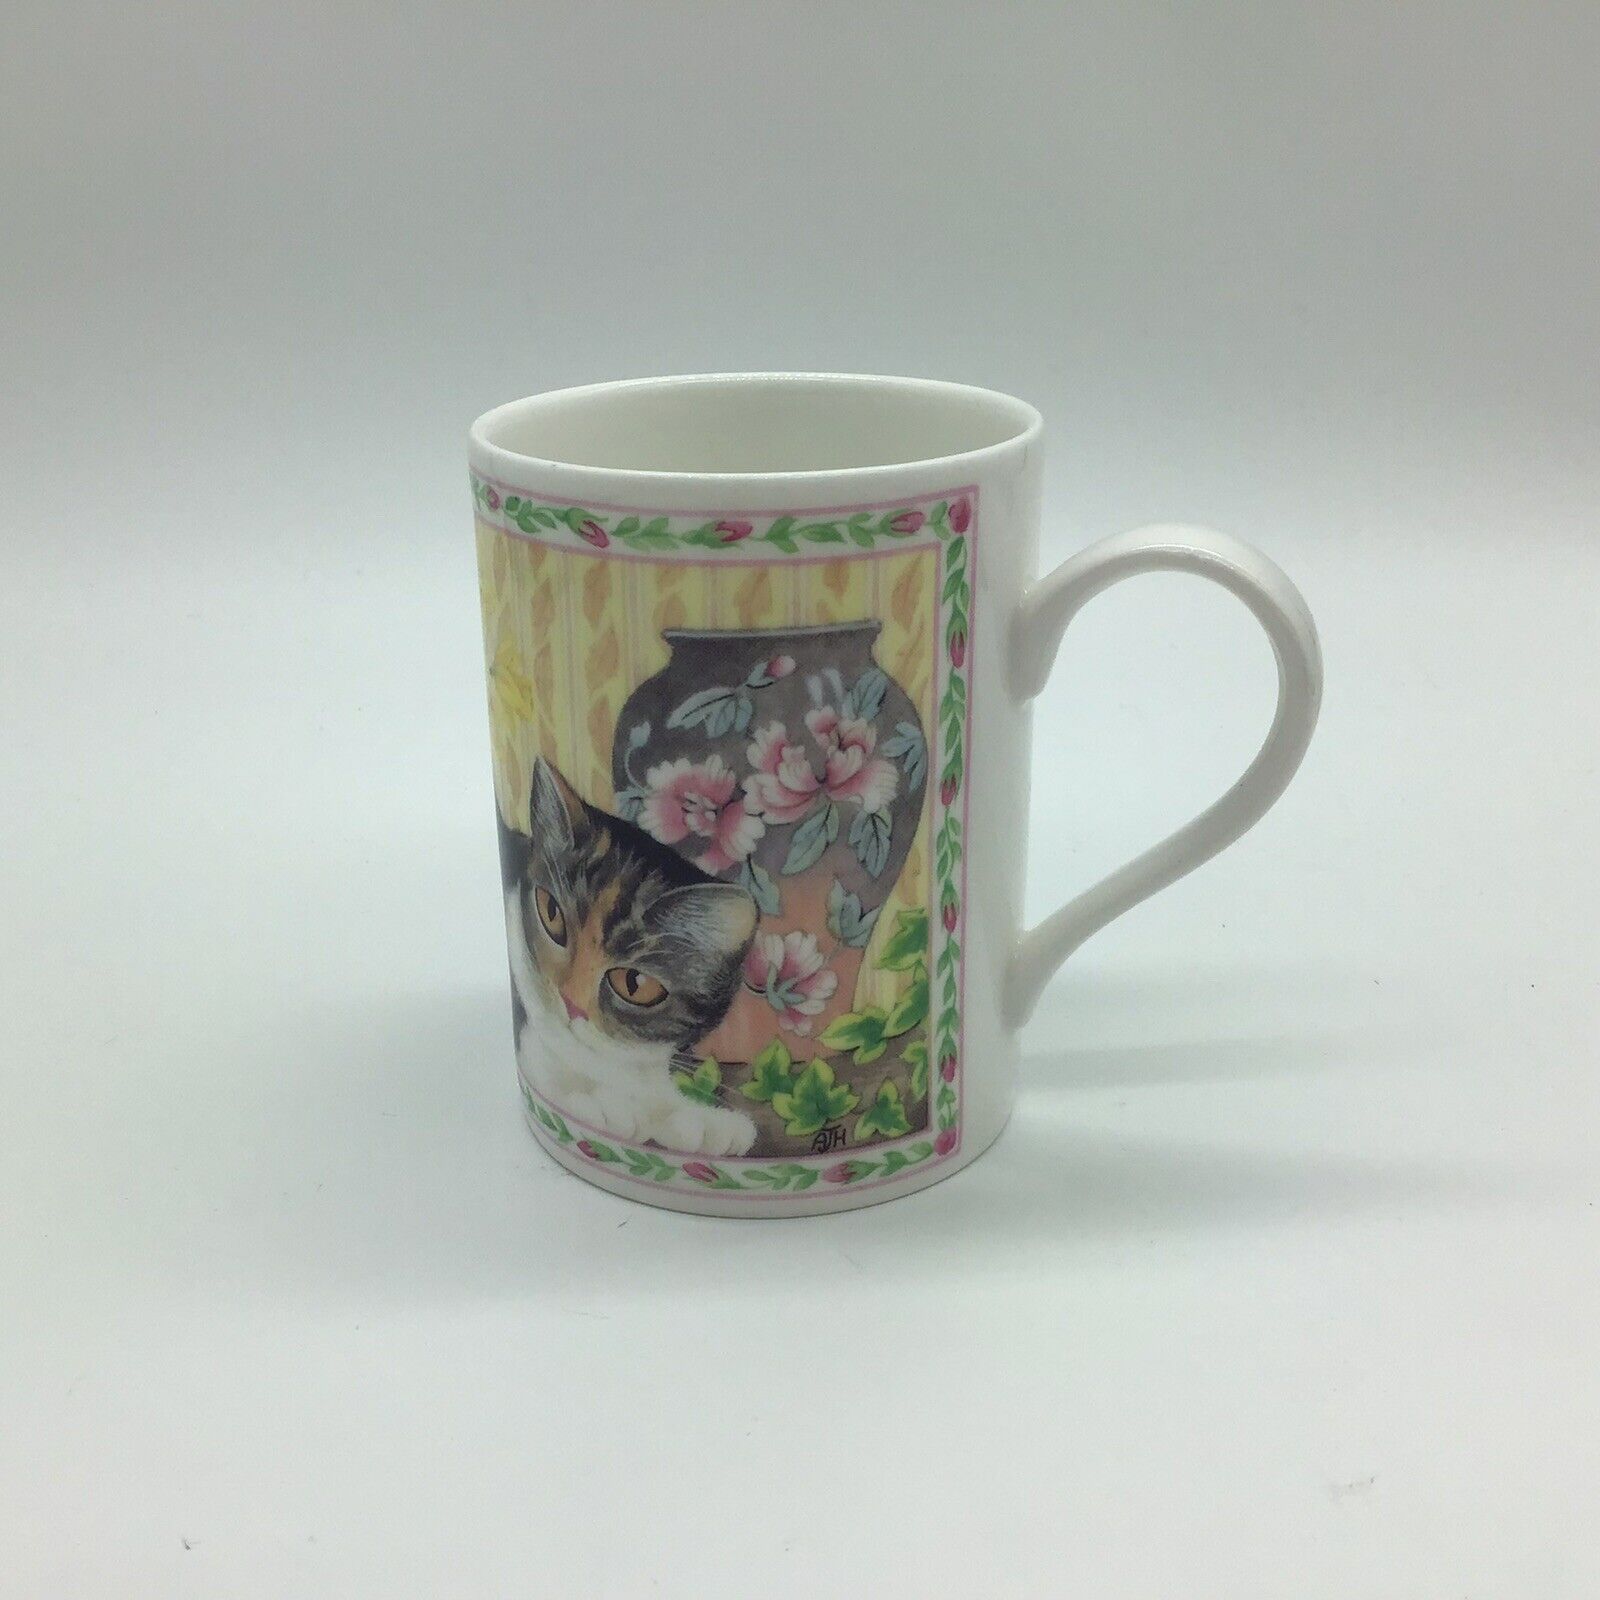 Queens Fine Bone China Cozy Cats Coffee Cup Mug England White Kitty Cat Flowers